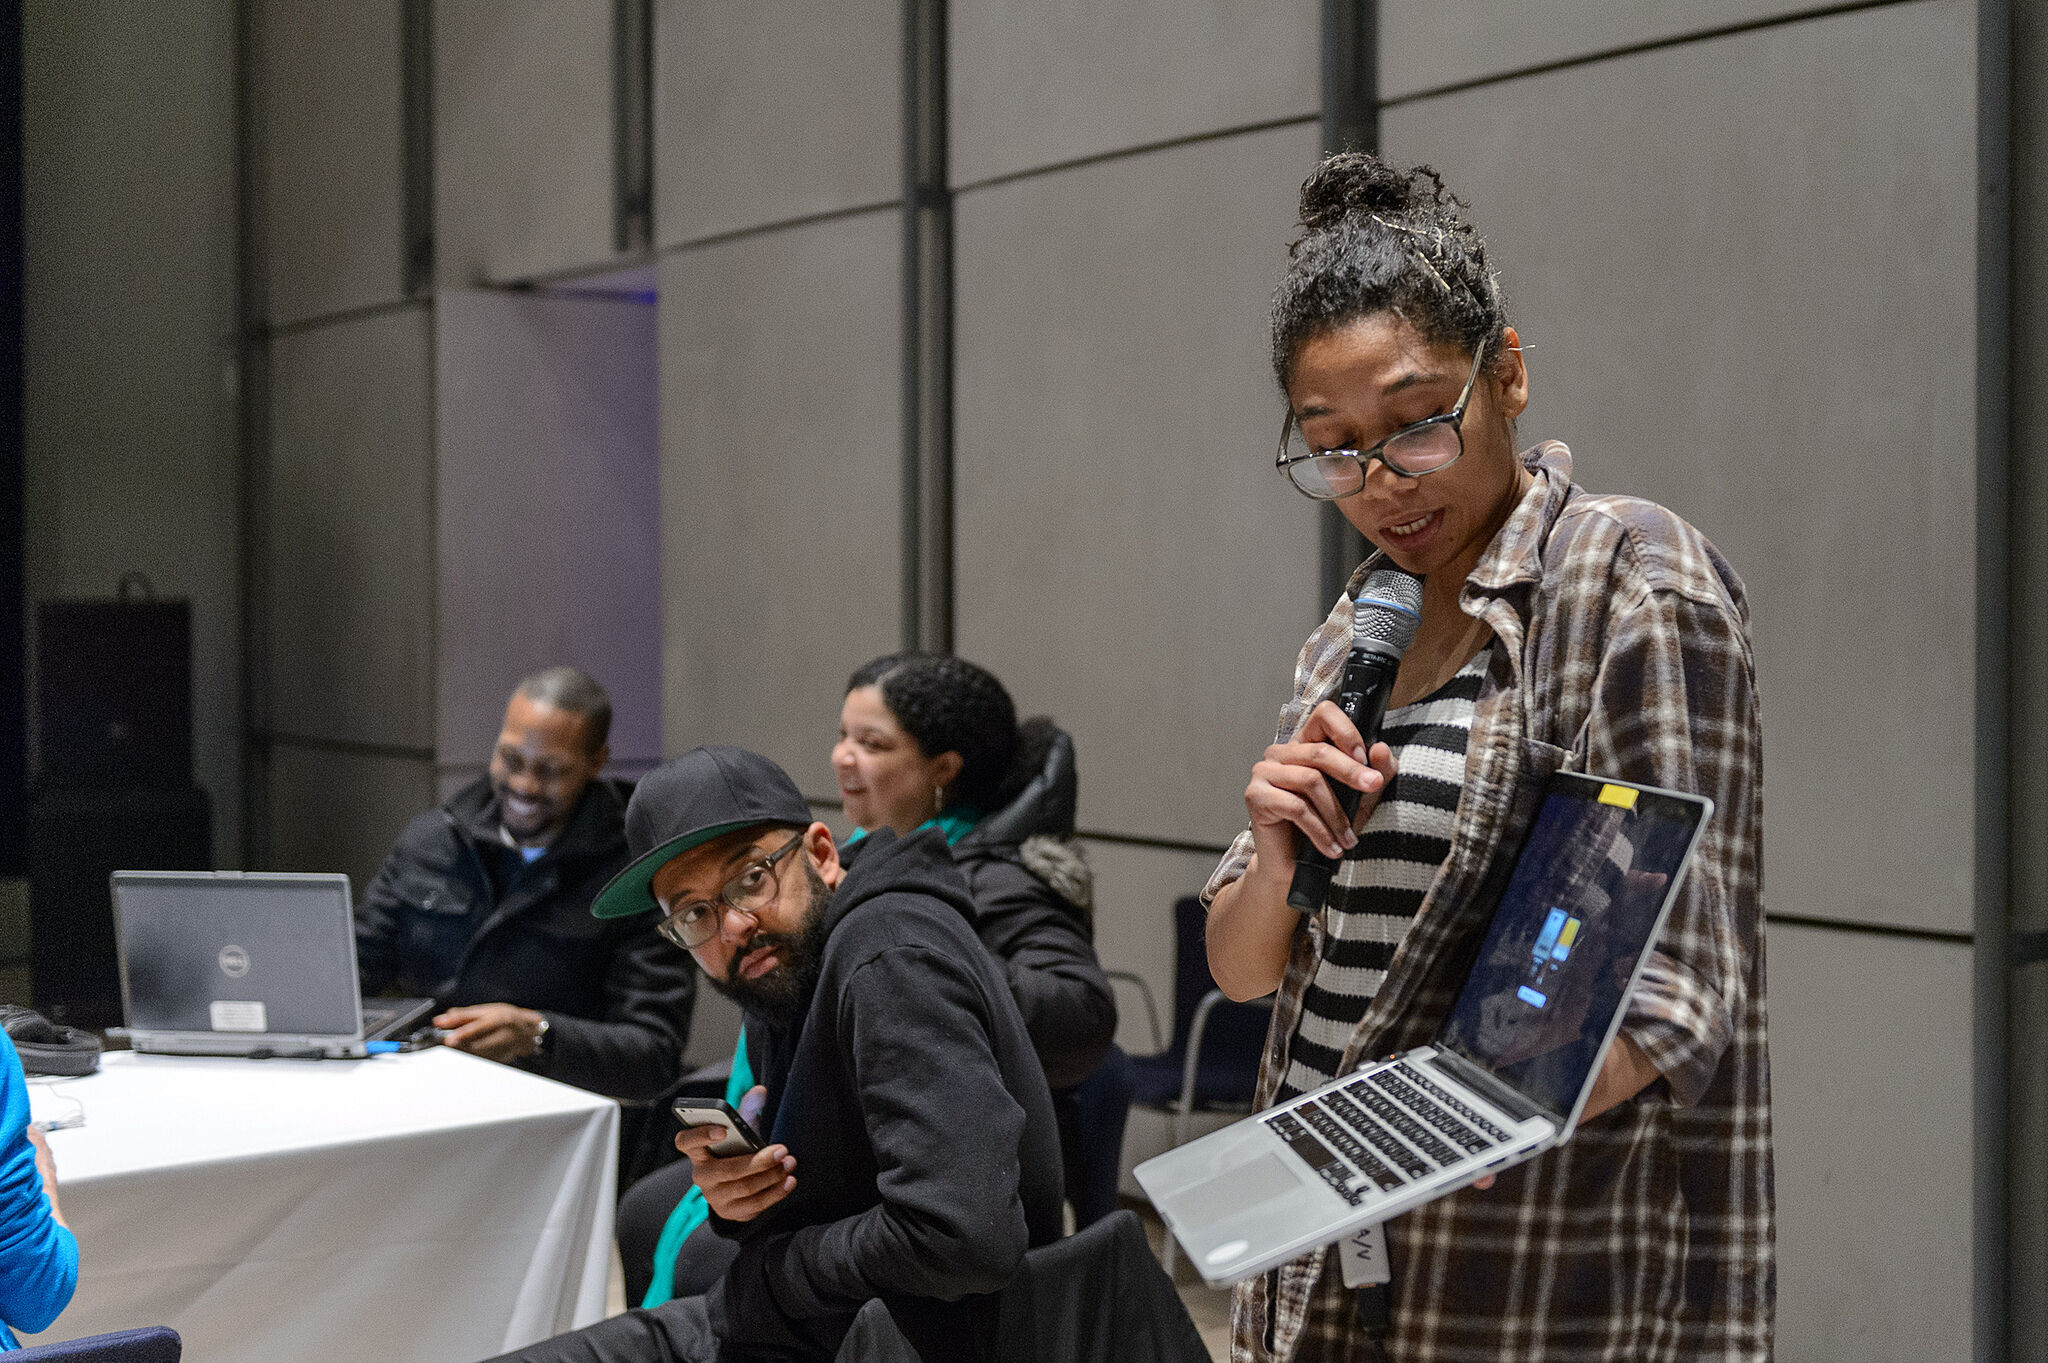 Harlo Holmes speaks into a mic while holding a laptop at a CryptoParty session